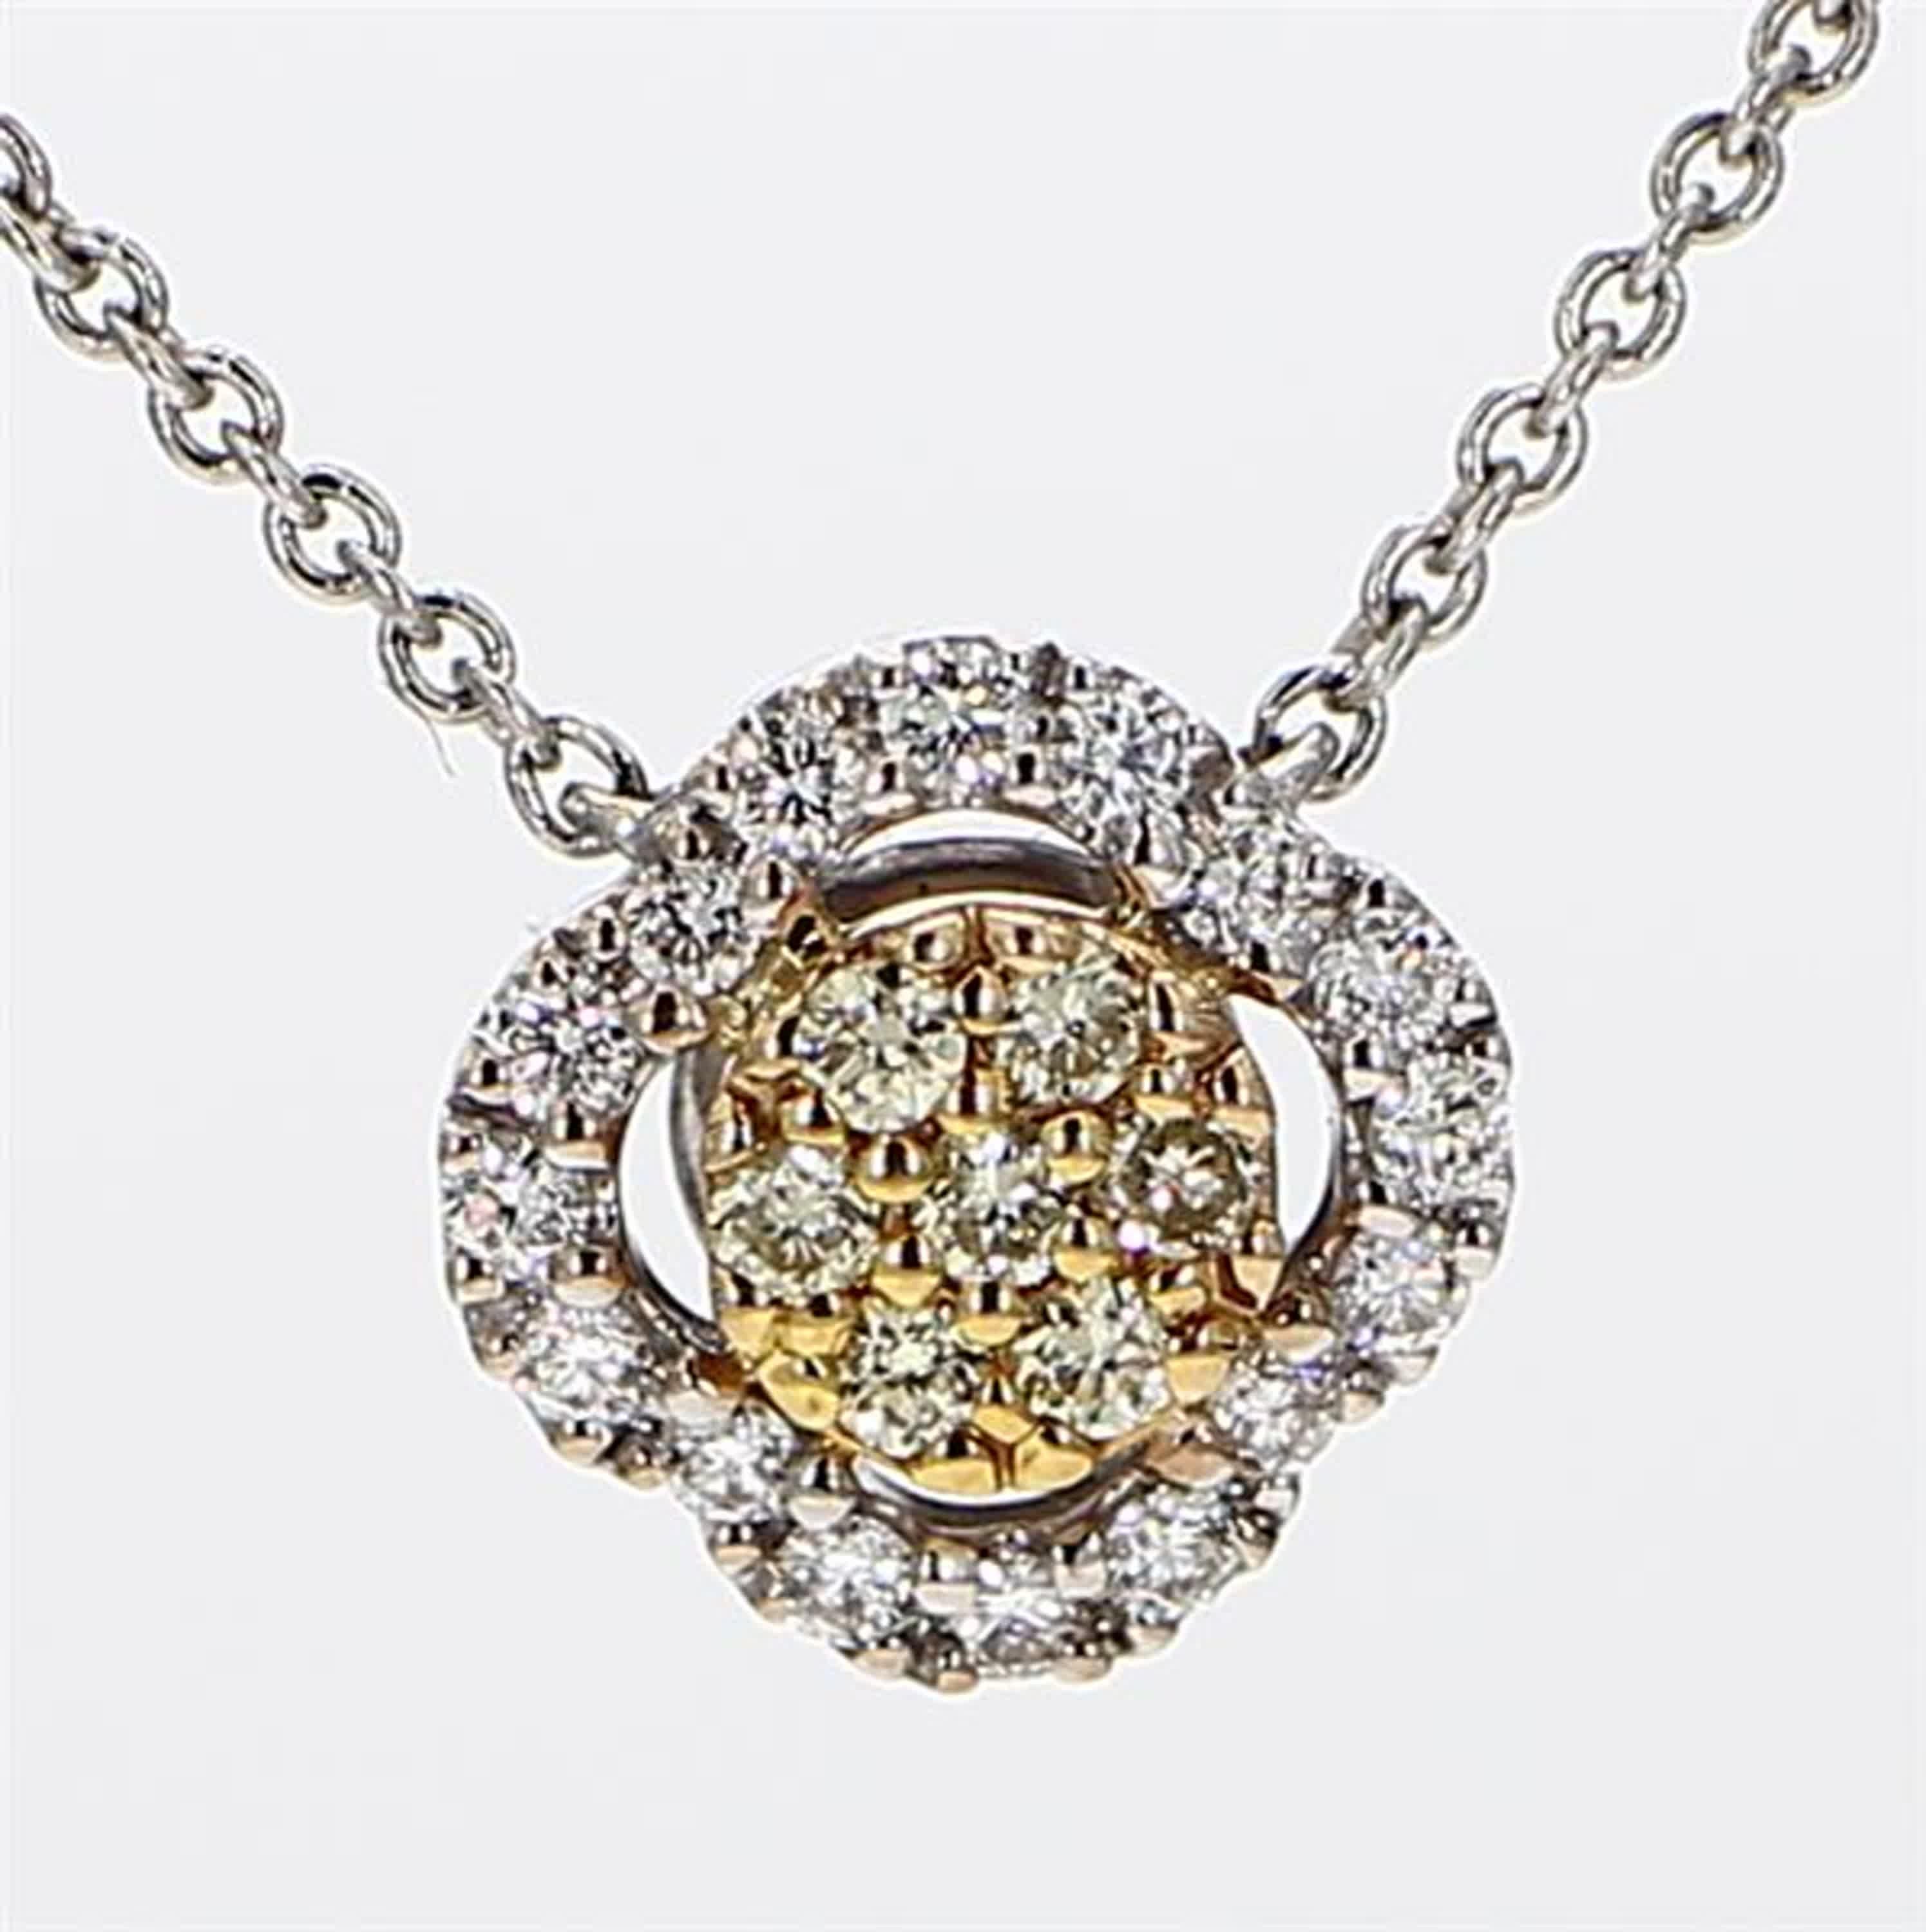 RareGemWorld's classic diamond necklace. Mounted in a beautiful 14K Yellow and White Gold setting with natural round yellow diamond melee complimented by natural round white diamond melee. This necklace is guaranteed to impress and enhance your